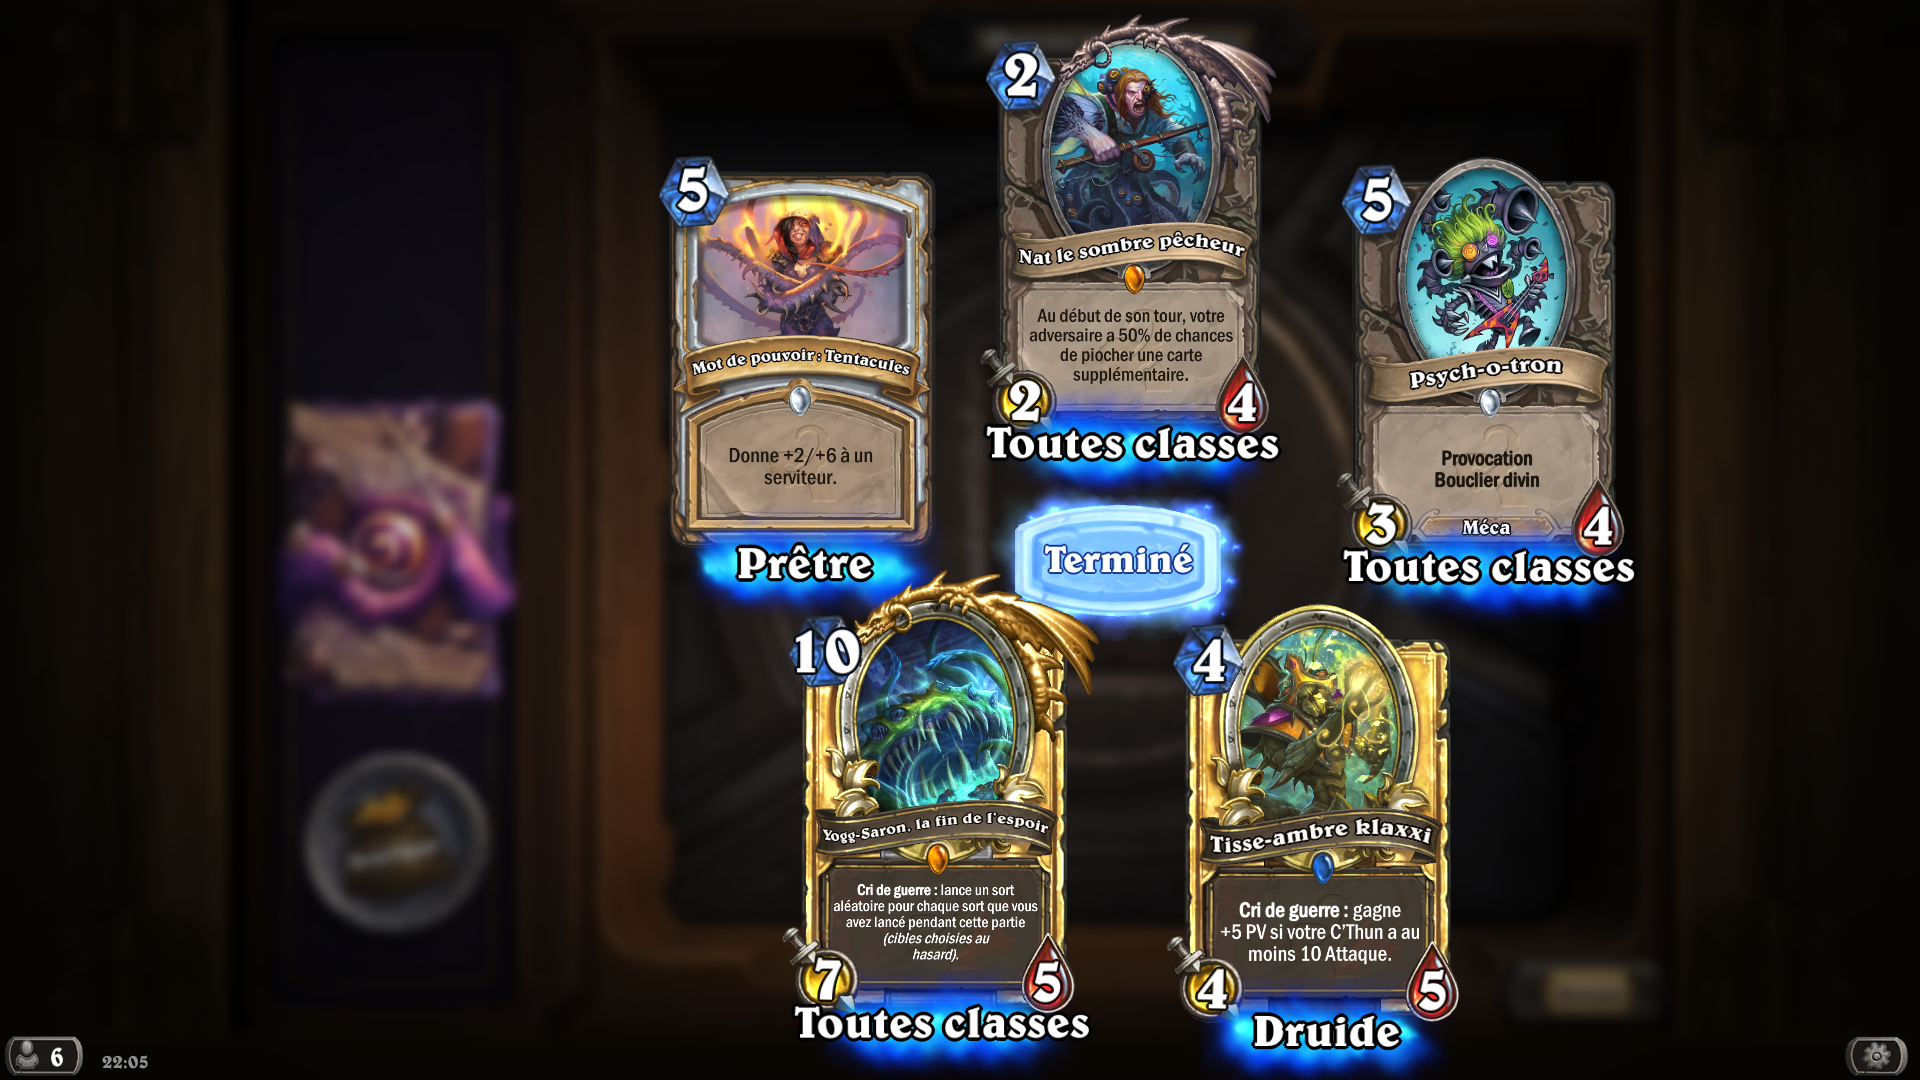 Nom : Hearthstone Screenshot 05-17-16 22.05.07.png
Affichages : 430
Taille : 1,76 Mo